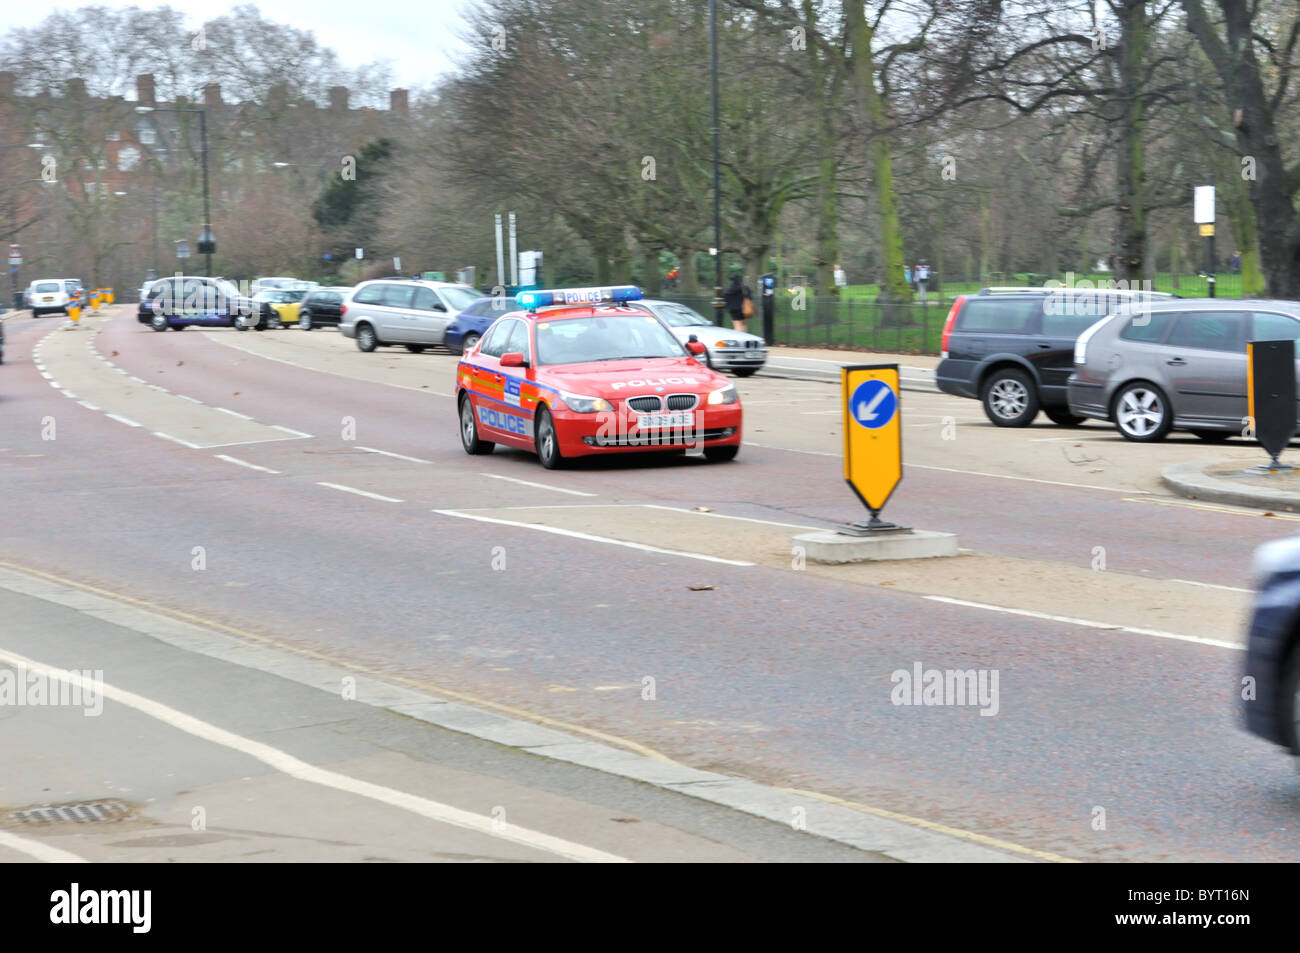 Red police car with lights on driving on london street Stock Photo